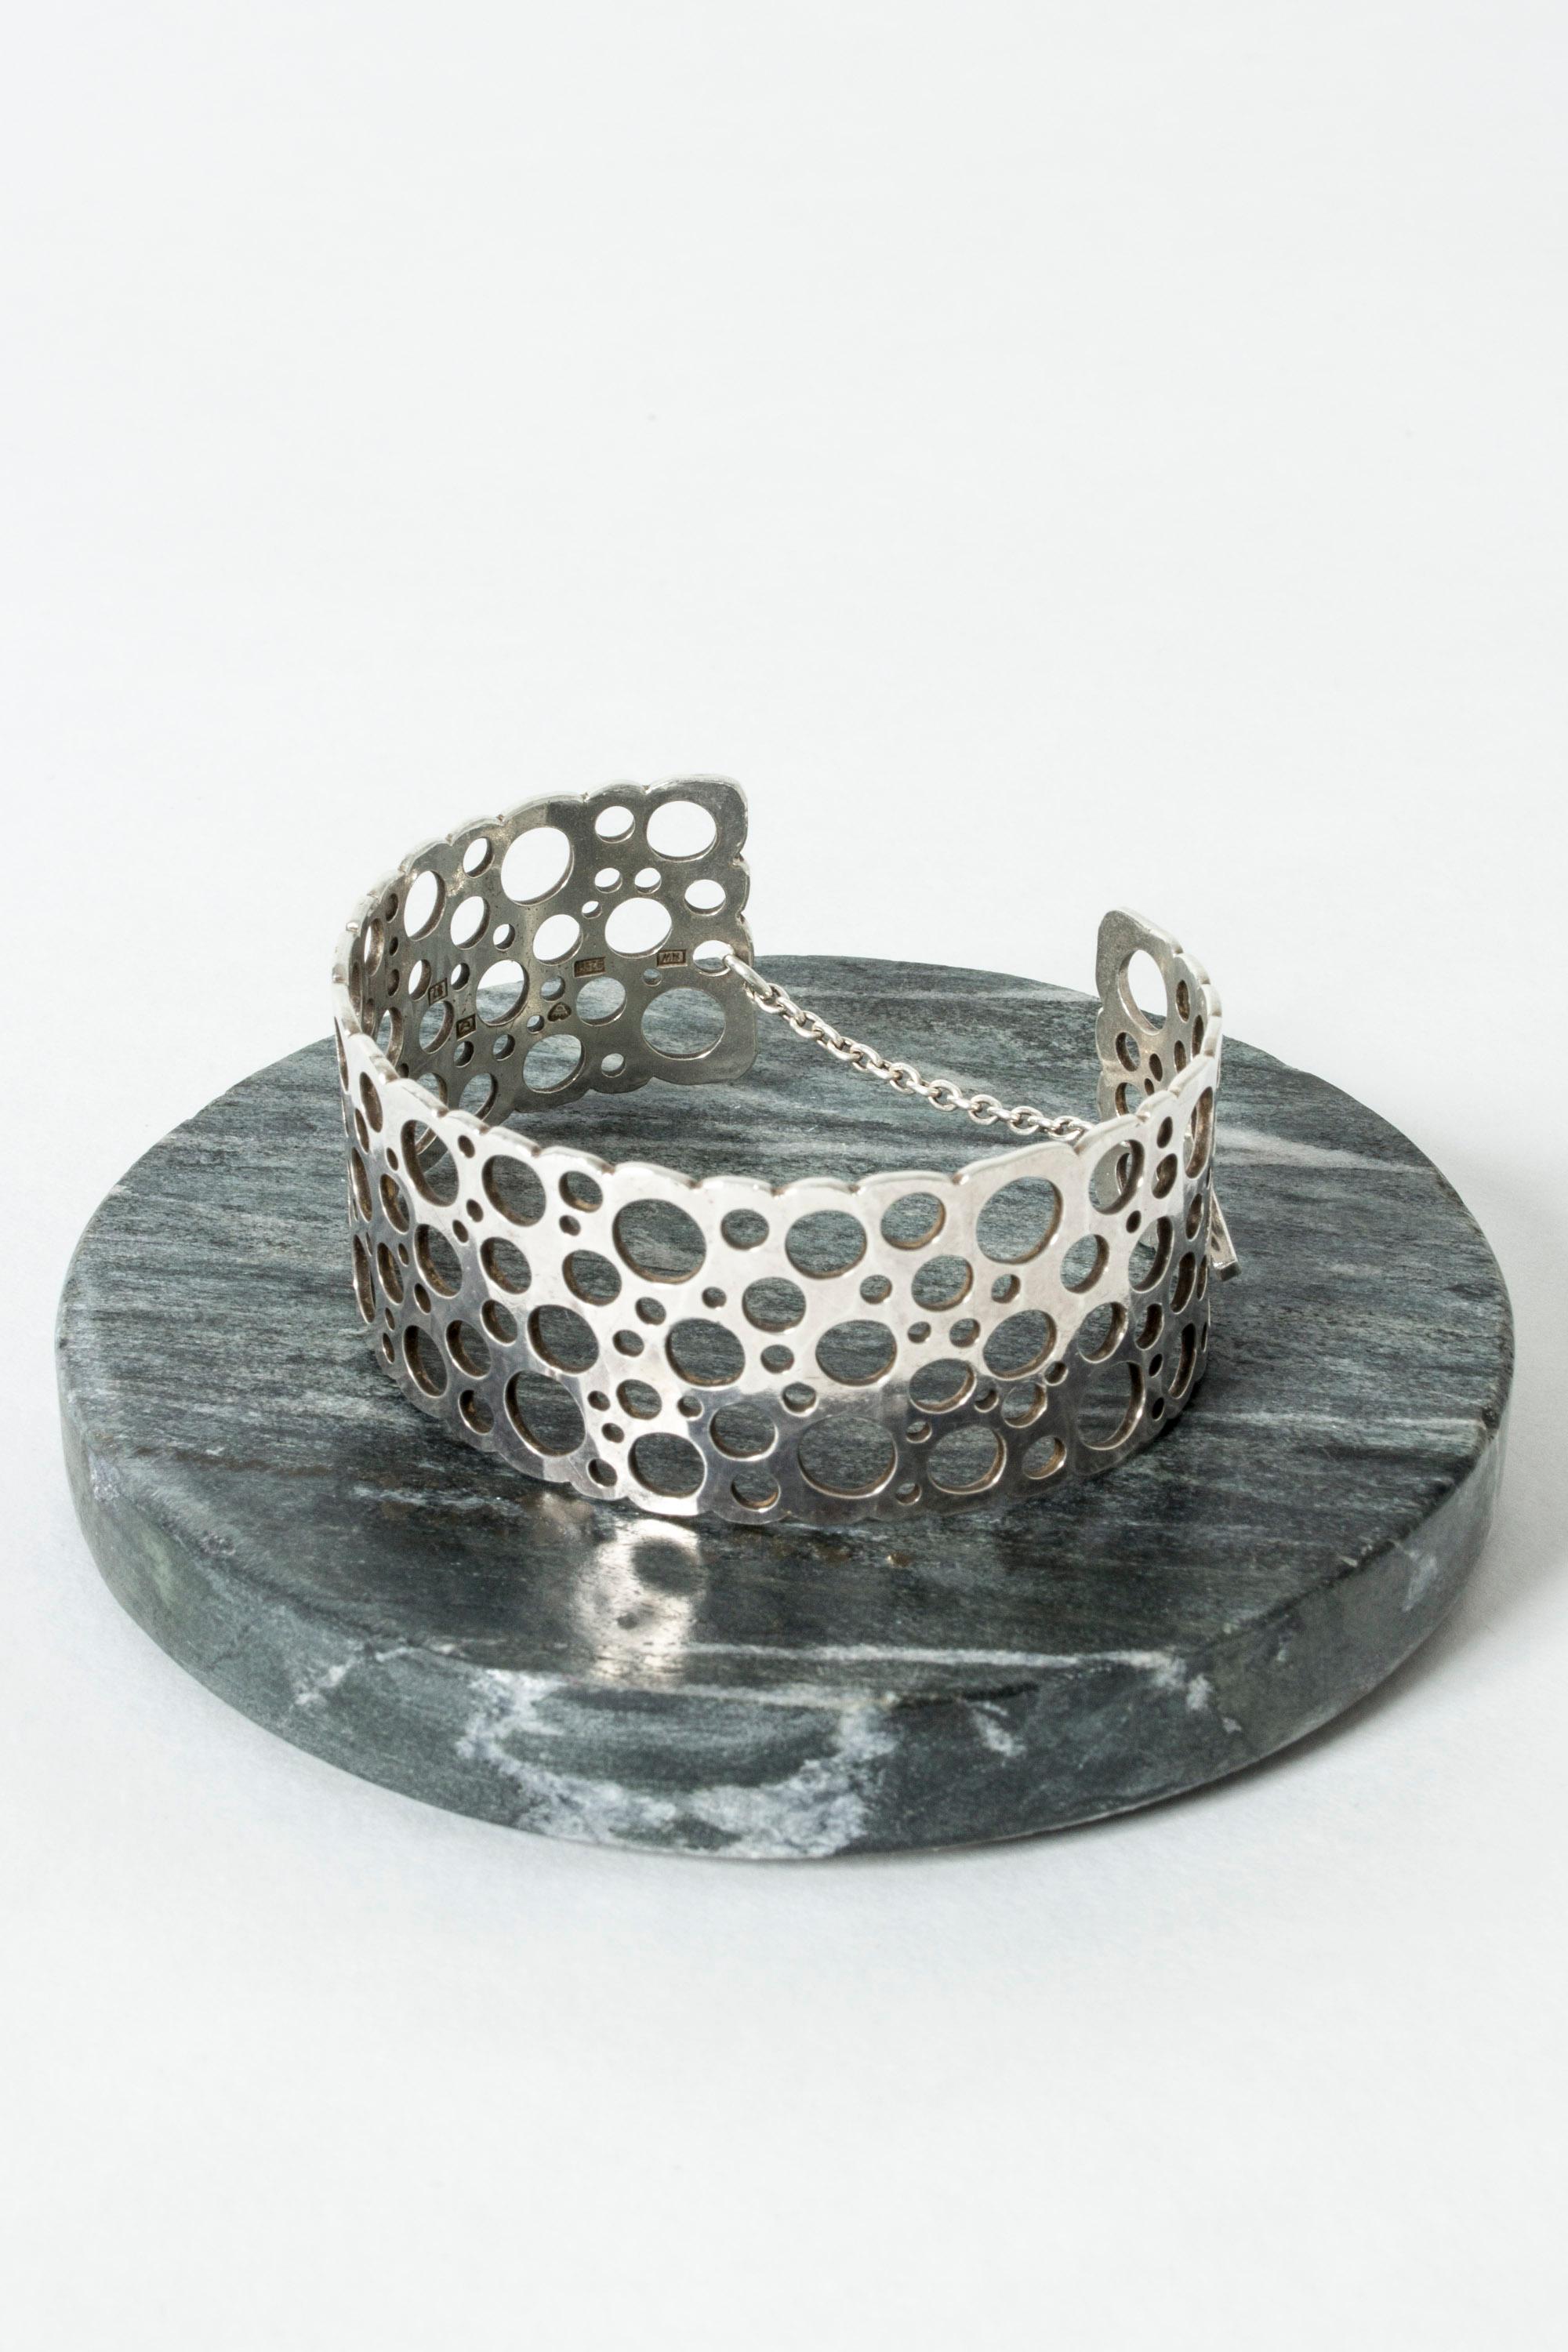 Amazing silver bracelet by Liisa Vitali, in a design called “Pitsi”, which means lace. Airy, playful design that looks great on the arm. Neat security chain on the back.